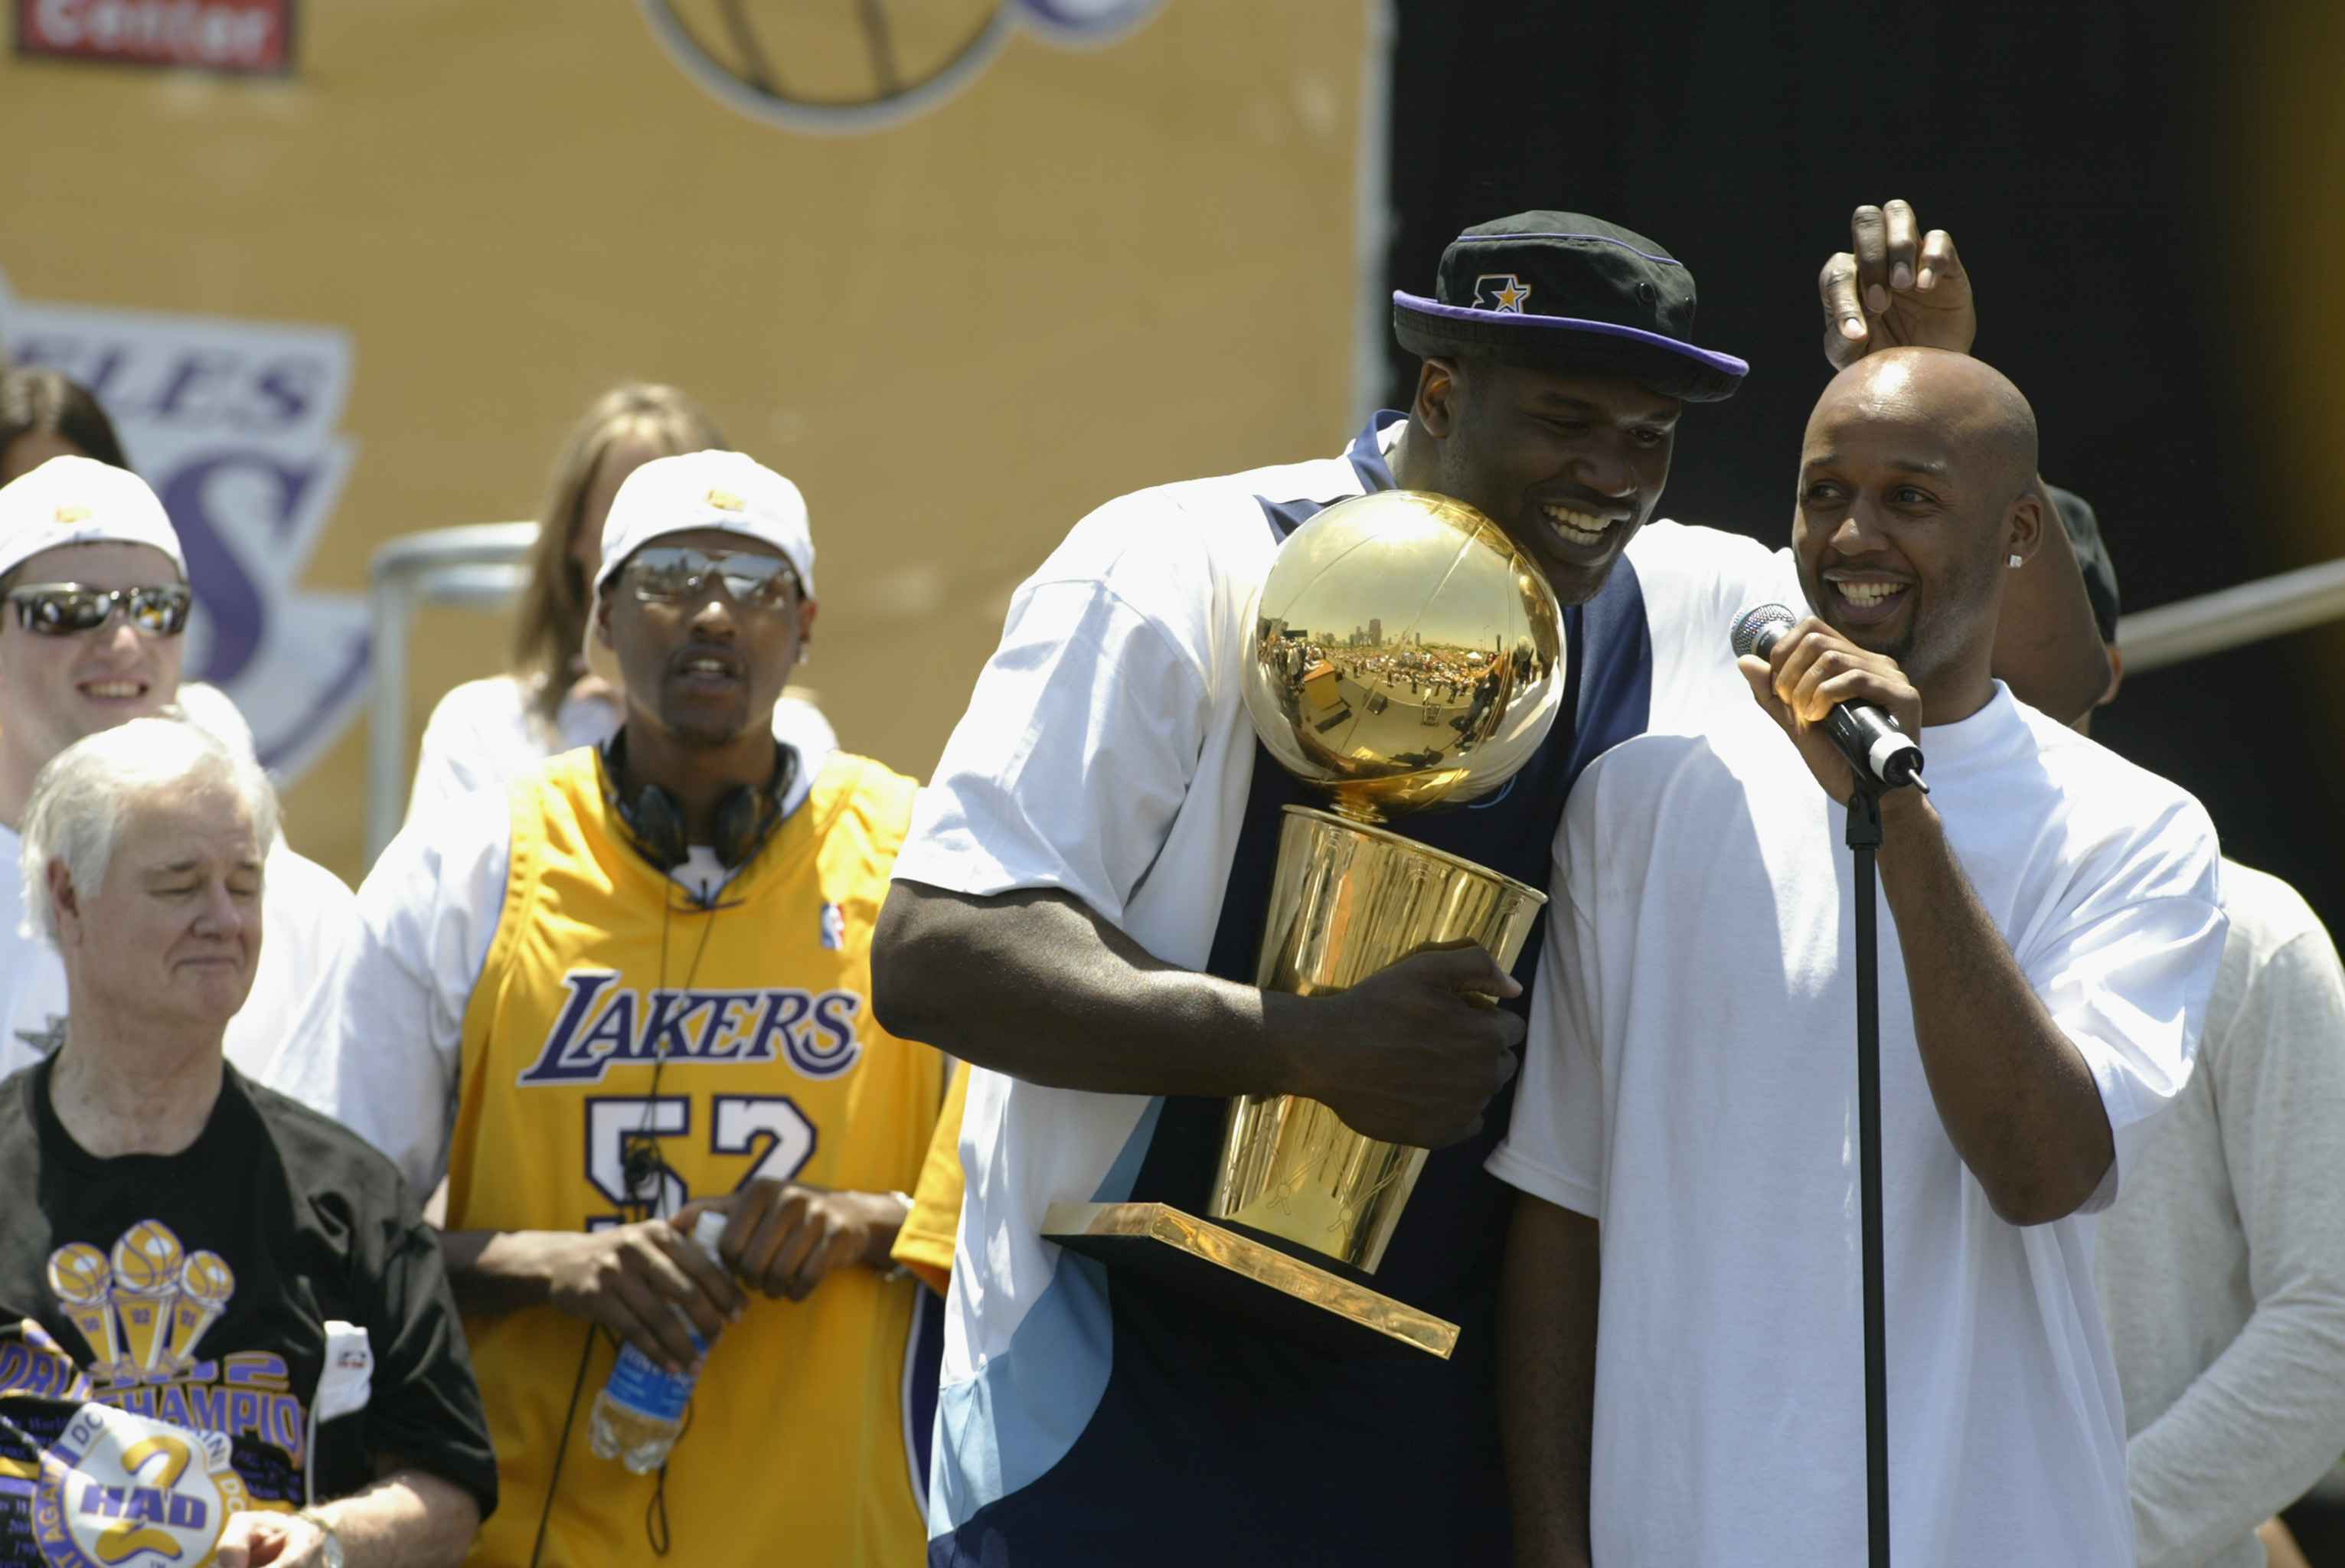 LOS ANGELES - JUNE 14: Brian Shaw #20 and Shaquille O'Neal #34 of the Los Angeles Lakers speak to the fans in front of the Staples Center following the victory parade on June 14, 2002 at Staples Center in Los Angeles, California.  The Lakers won their thi